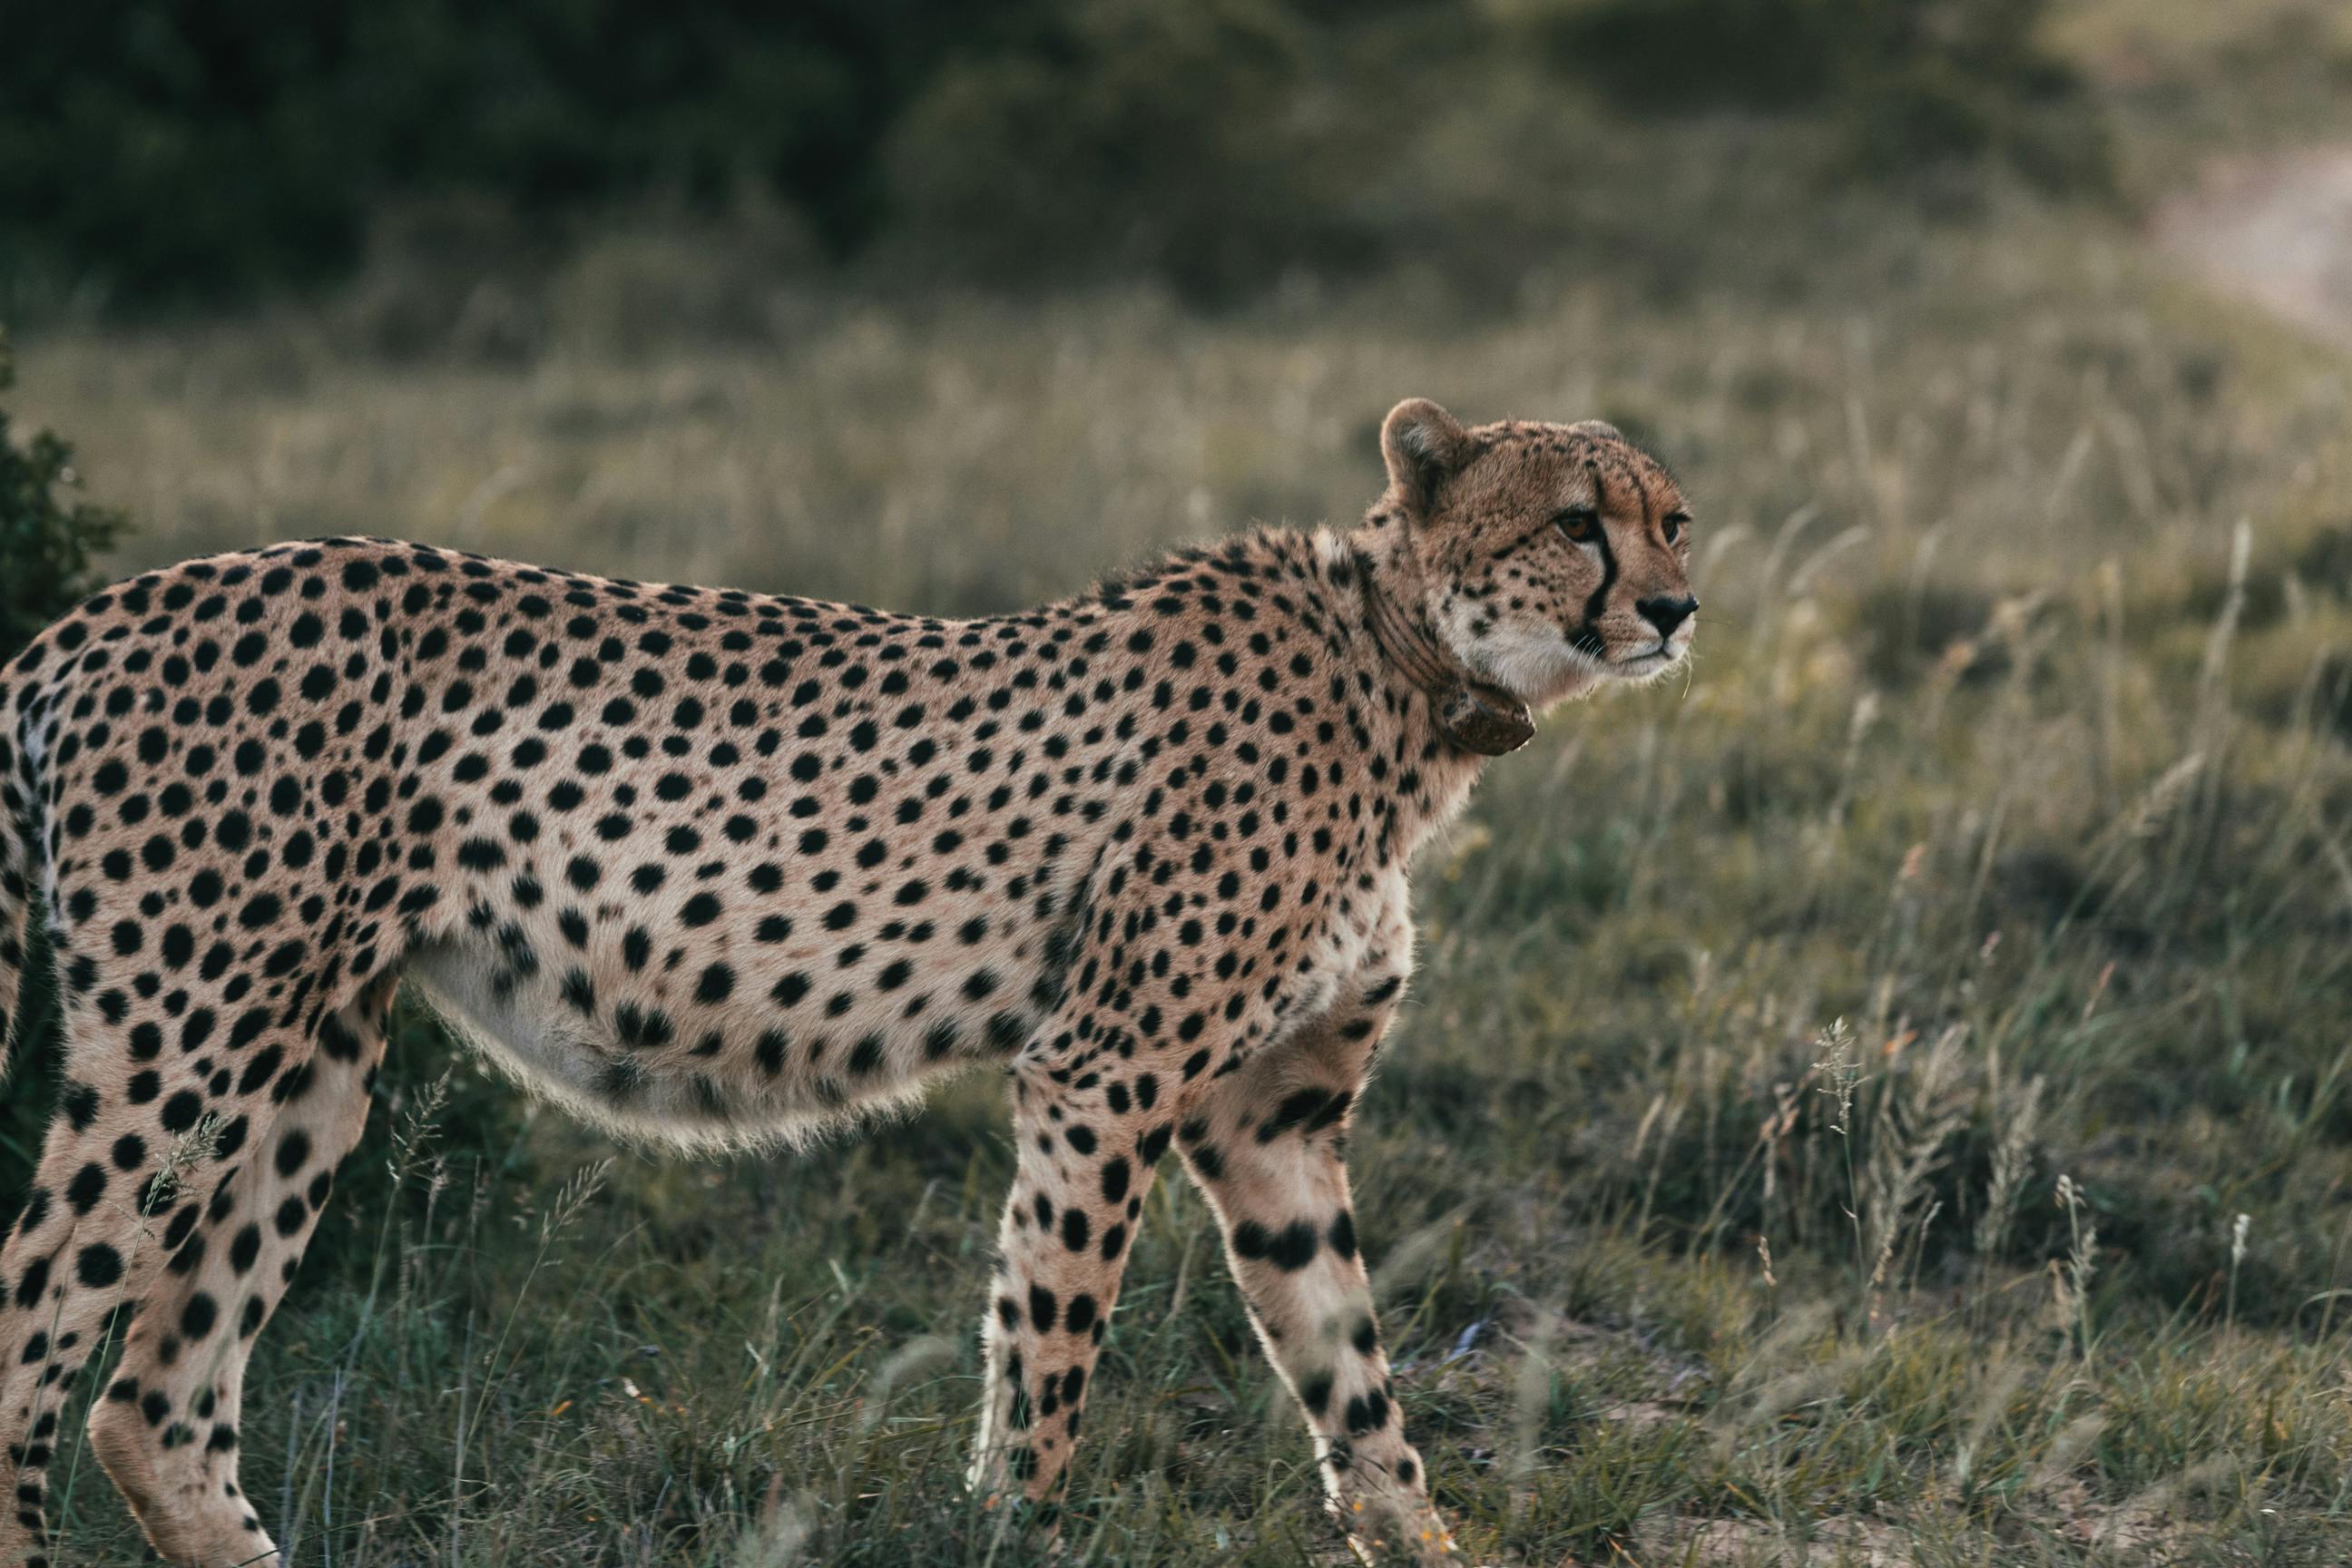 Cheetah In Meadow Background Images, HD Pictures and Wallpaper For Free  Download